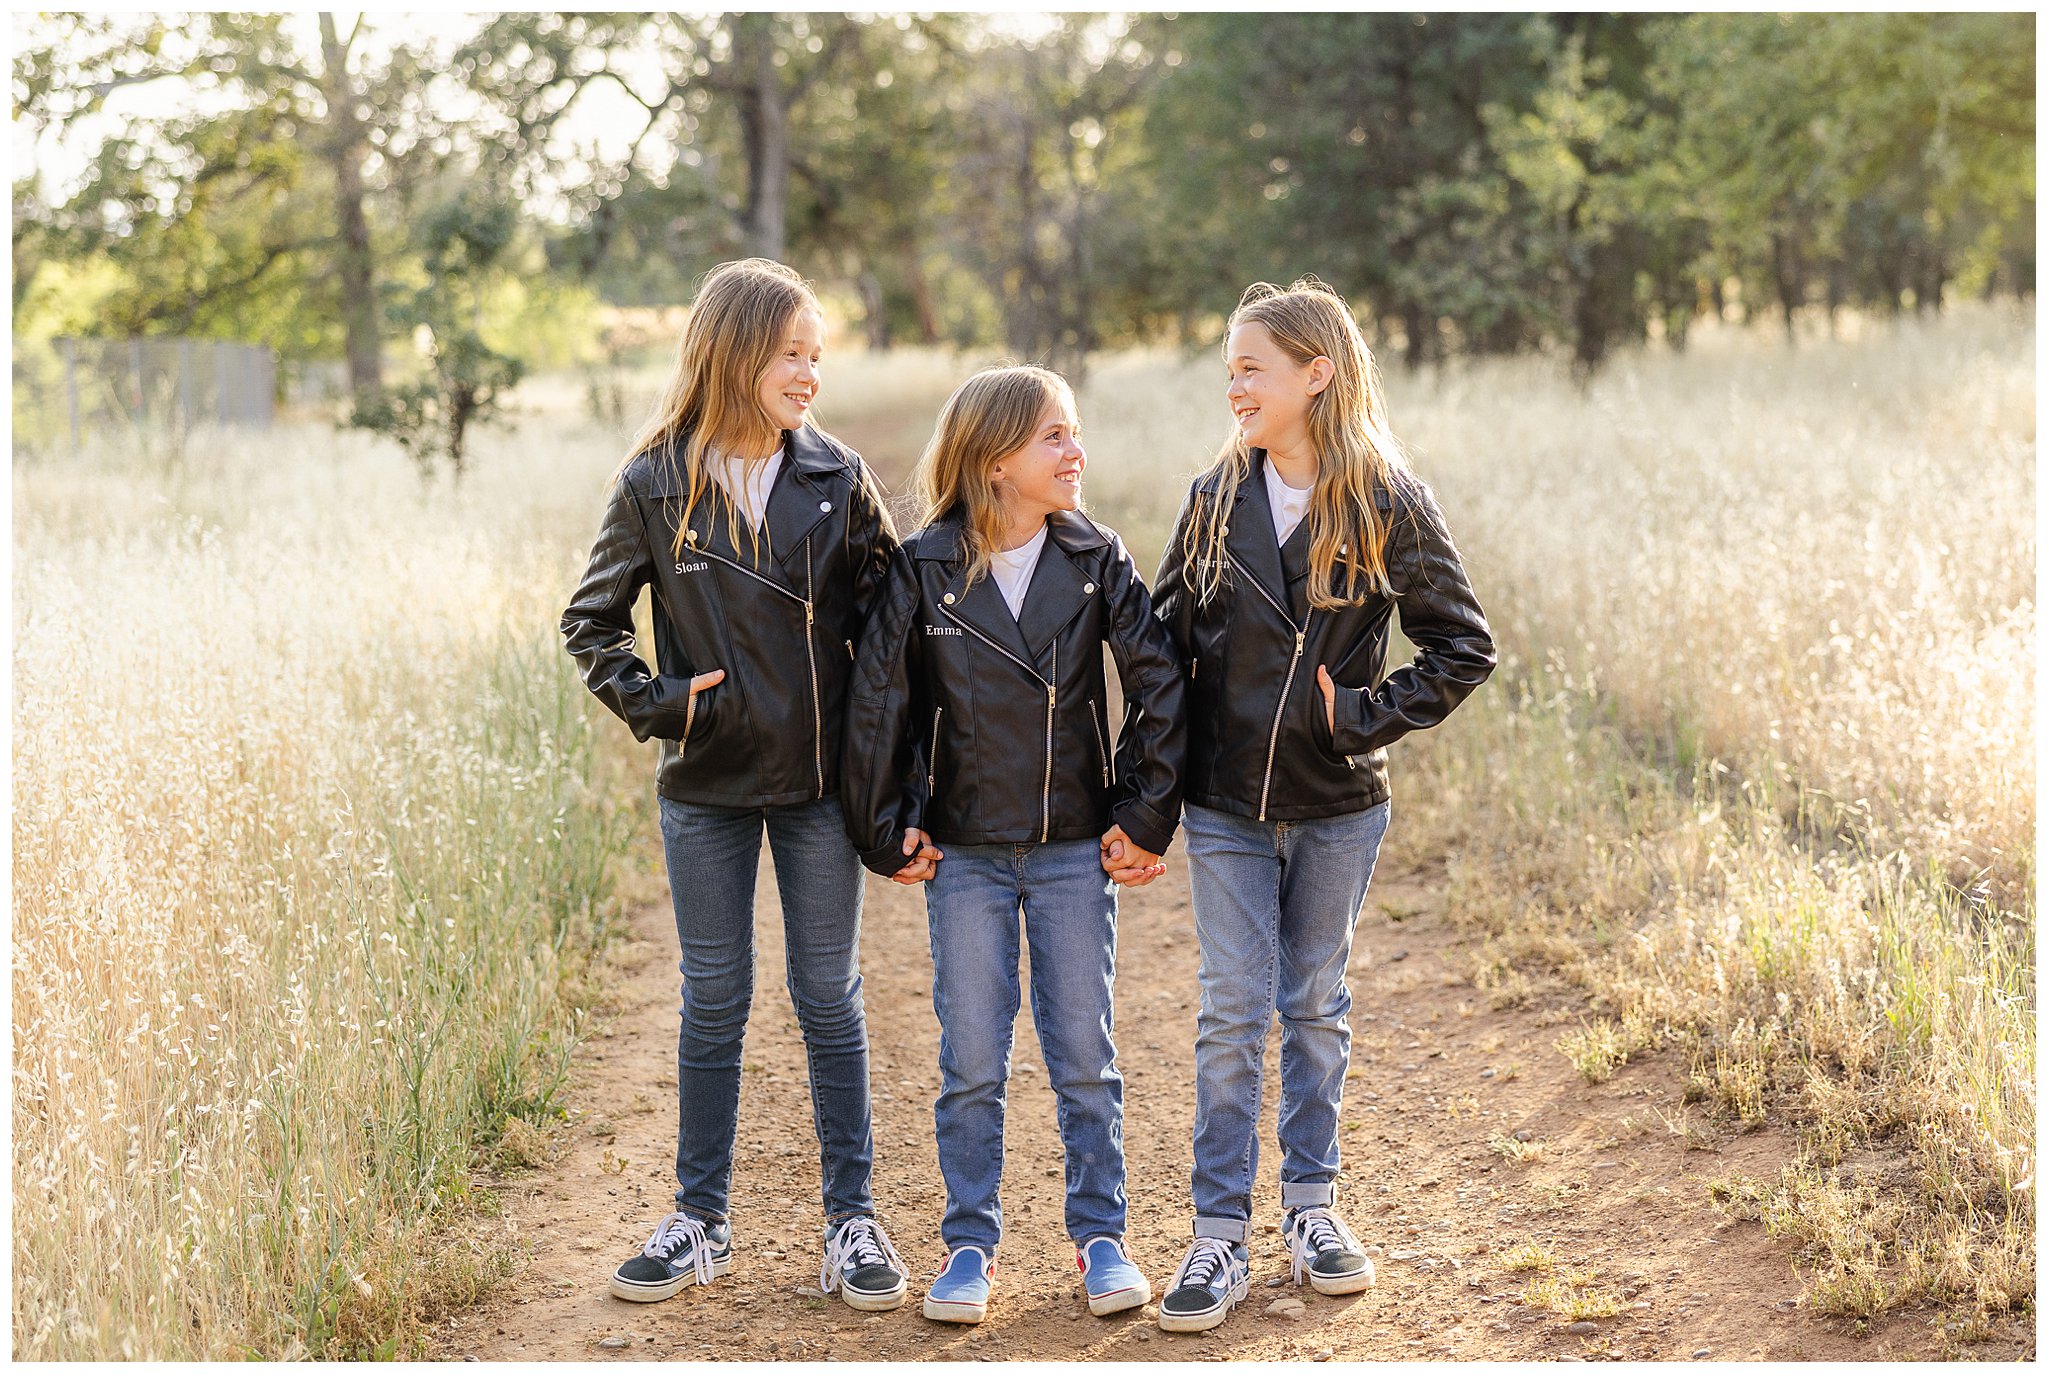 Upper Bidwell Park Trail Girlfriends Session Chico CA Moto Jackets Jeans Spring May,